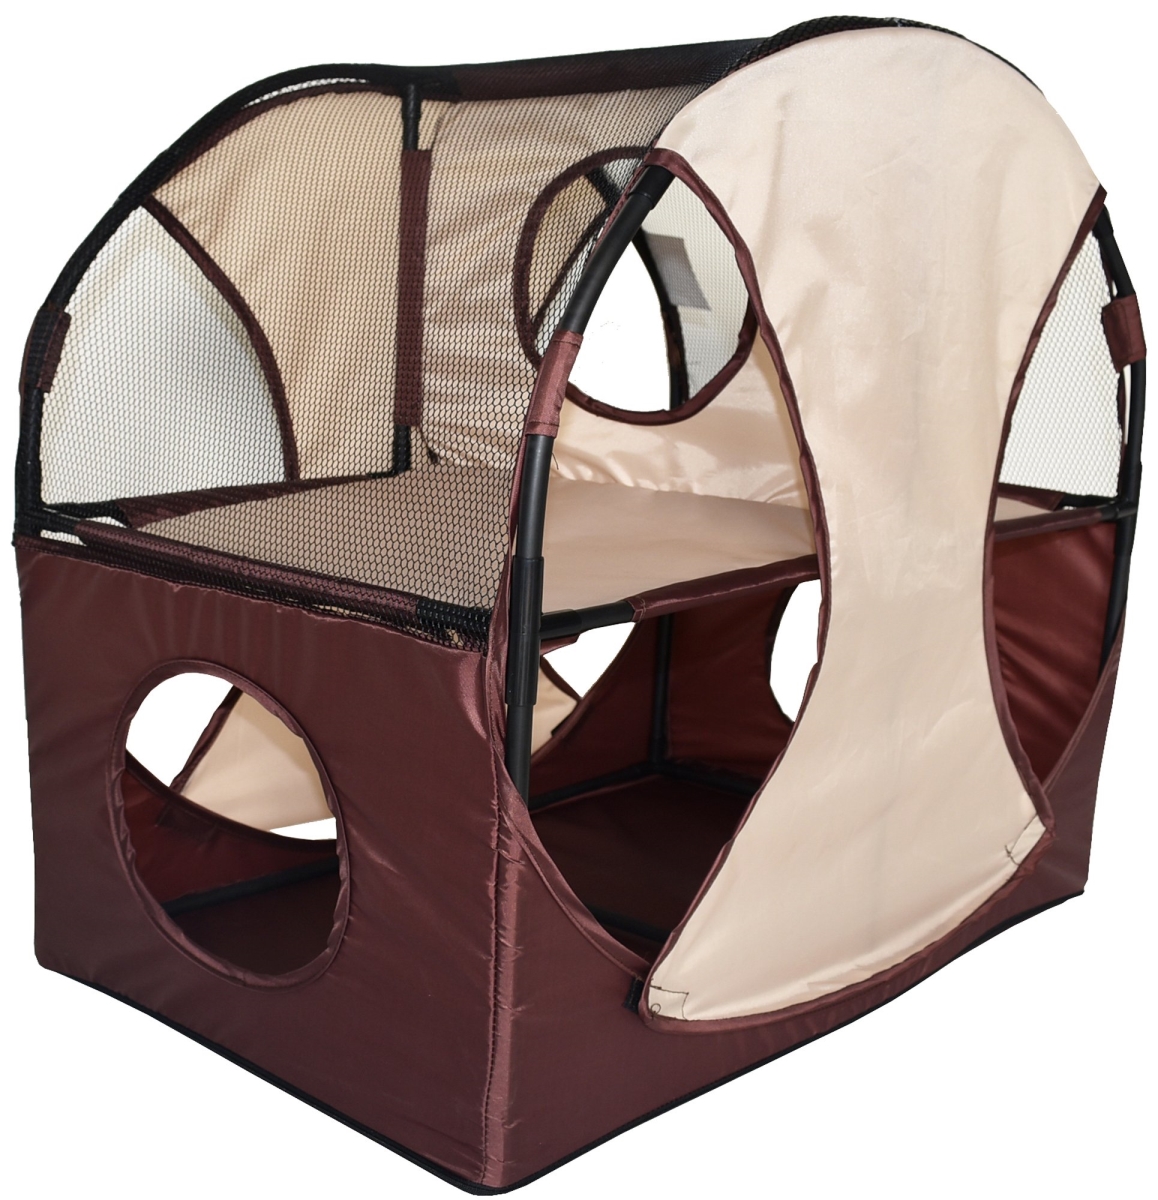 Kitty Play Pet Cat House, Khaki & Brown - One Size